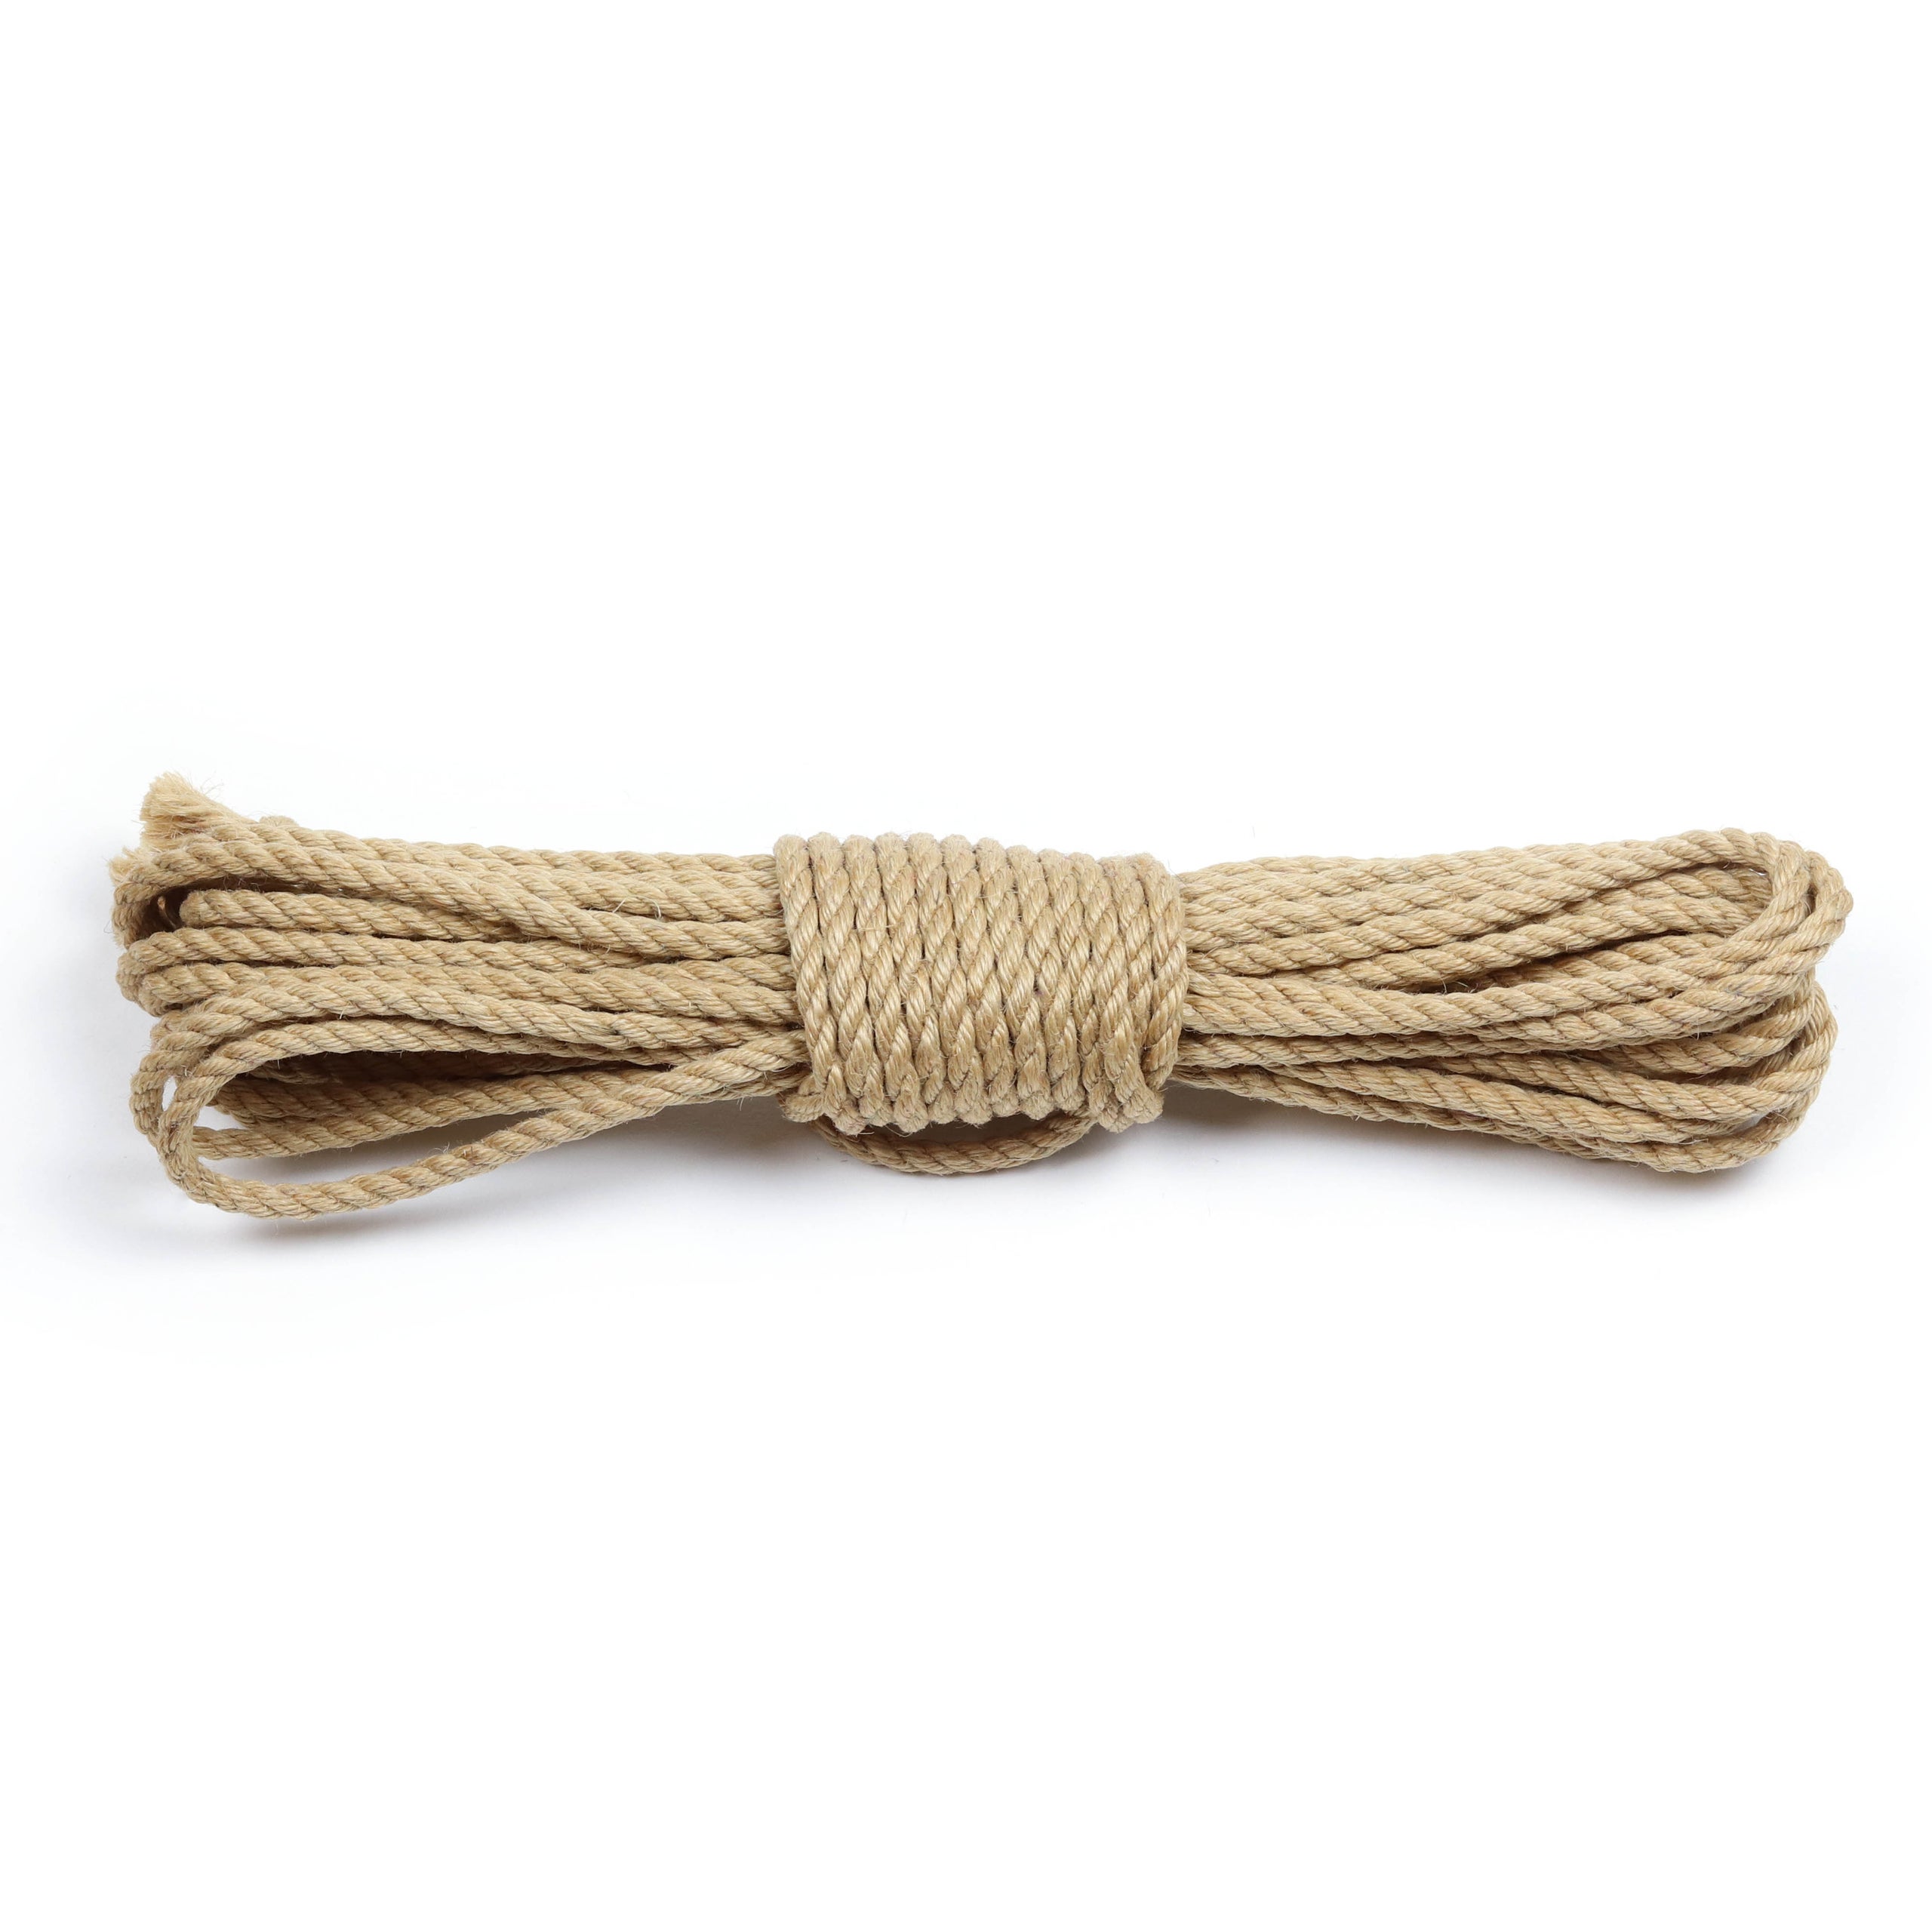 50 Yards Jute Twine String / Abaca String (2ply / 3ply)